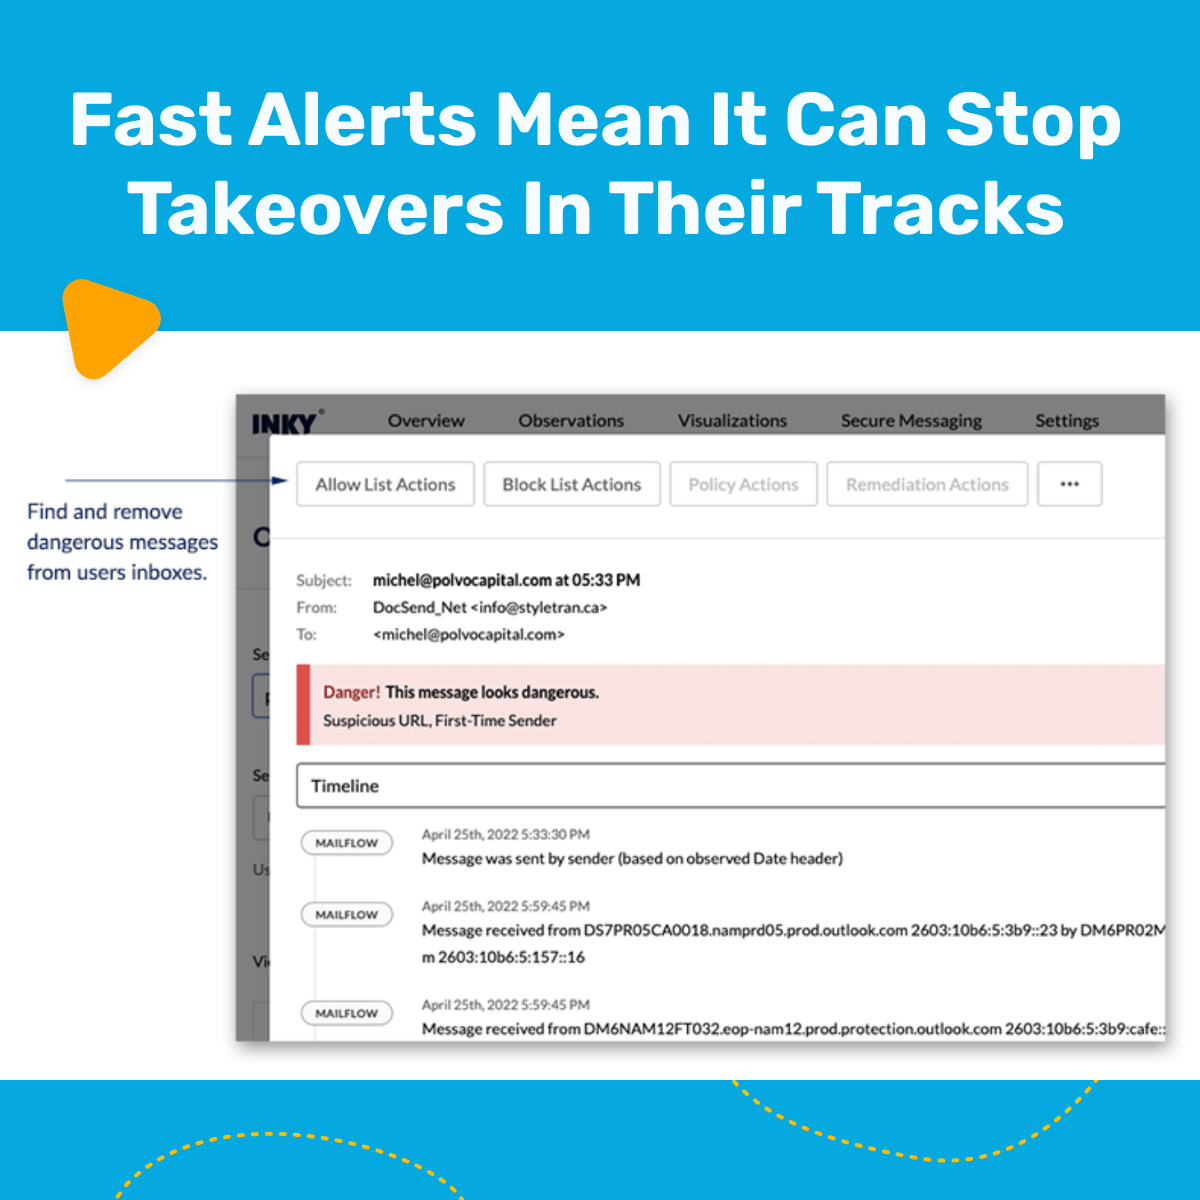 Fast alerts mean IT can stop takeovers in their tracks